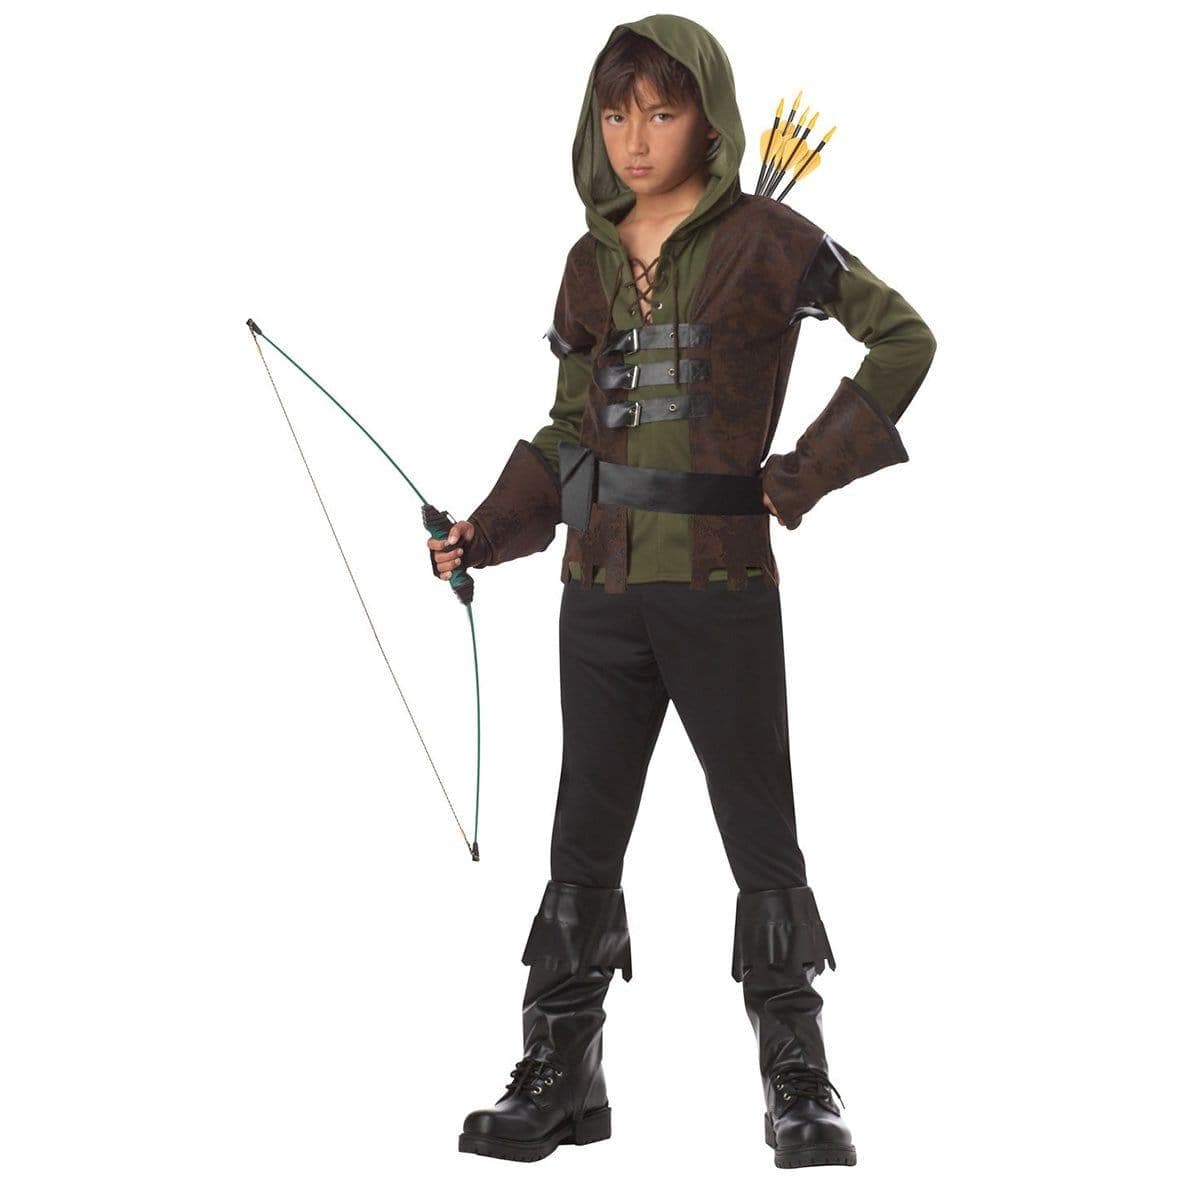 Buy Costumes Robin Hood Costume for Kids, Robin Hood sold at Party Expert